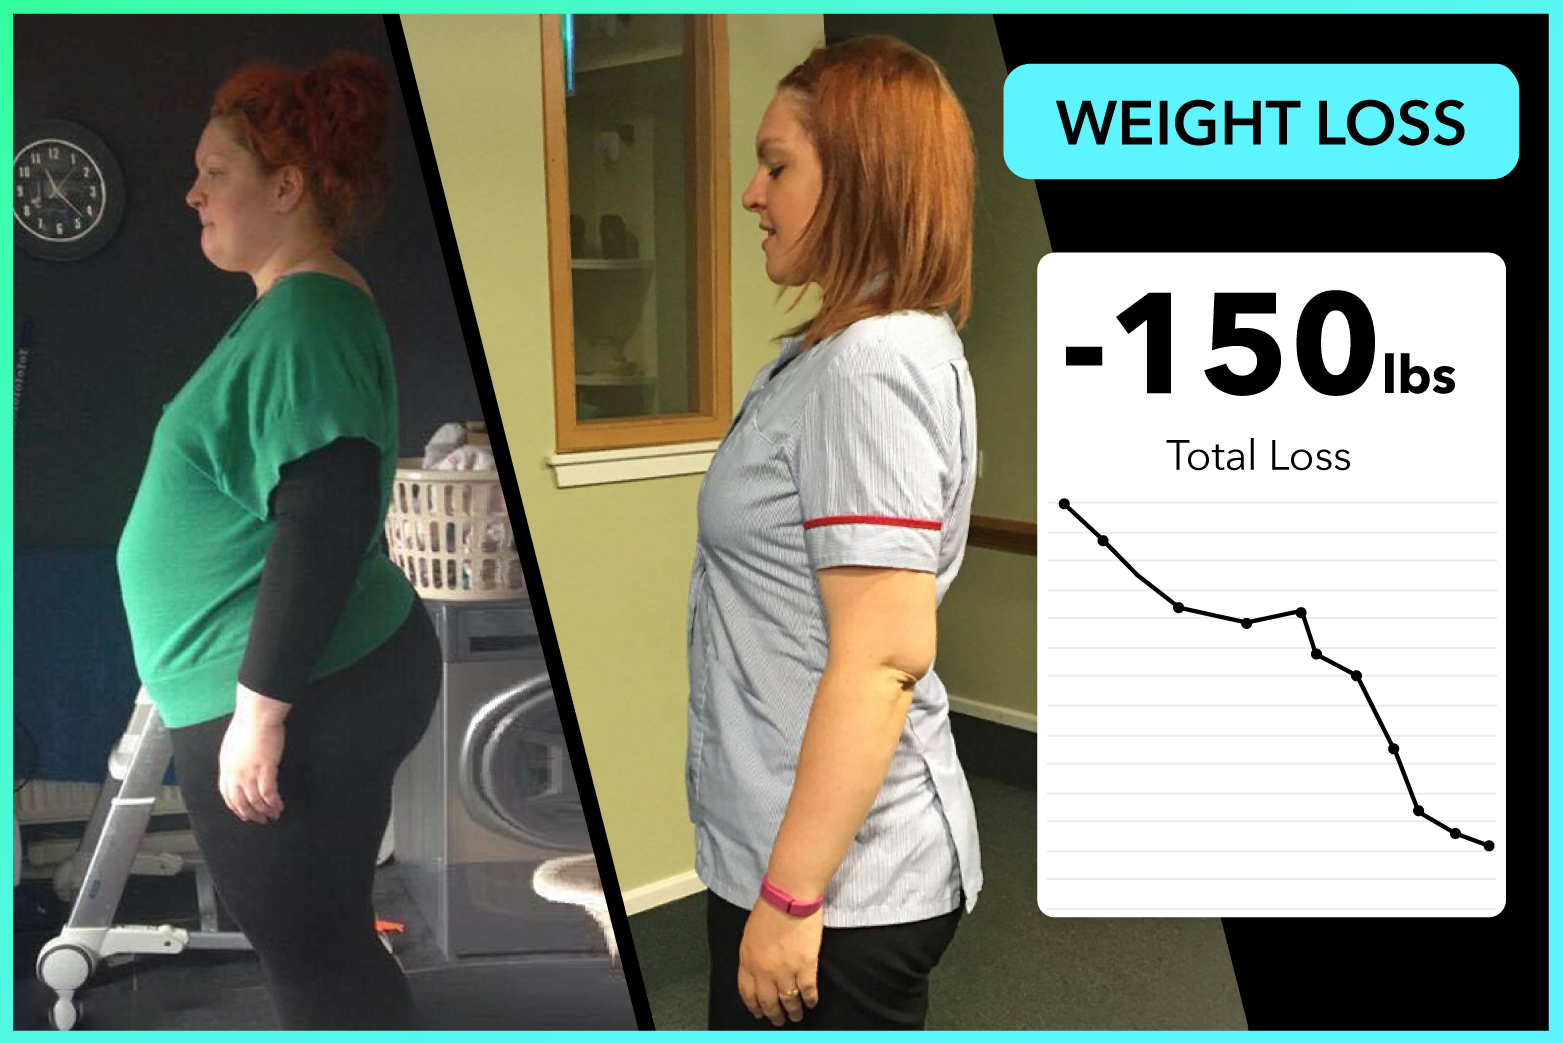 Jemma lost an amazing 150lbs with Team RH